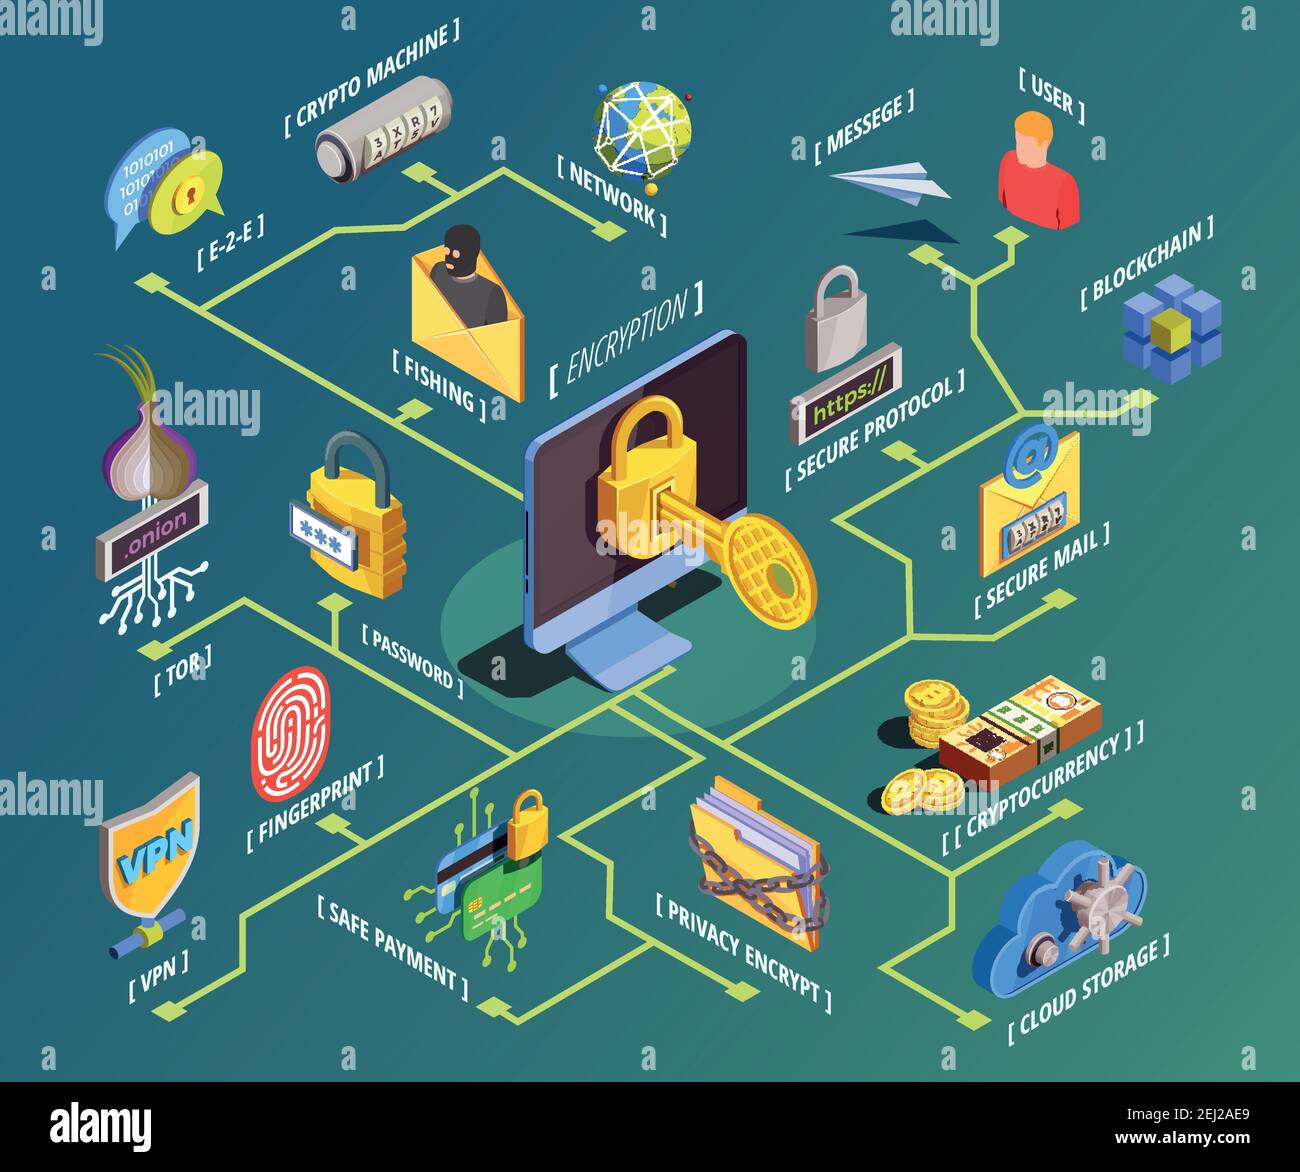 Data encryption cyber security isometric flowchart composition with internet security pictograms and symbols with text captions vector illustration Stock Vector